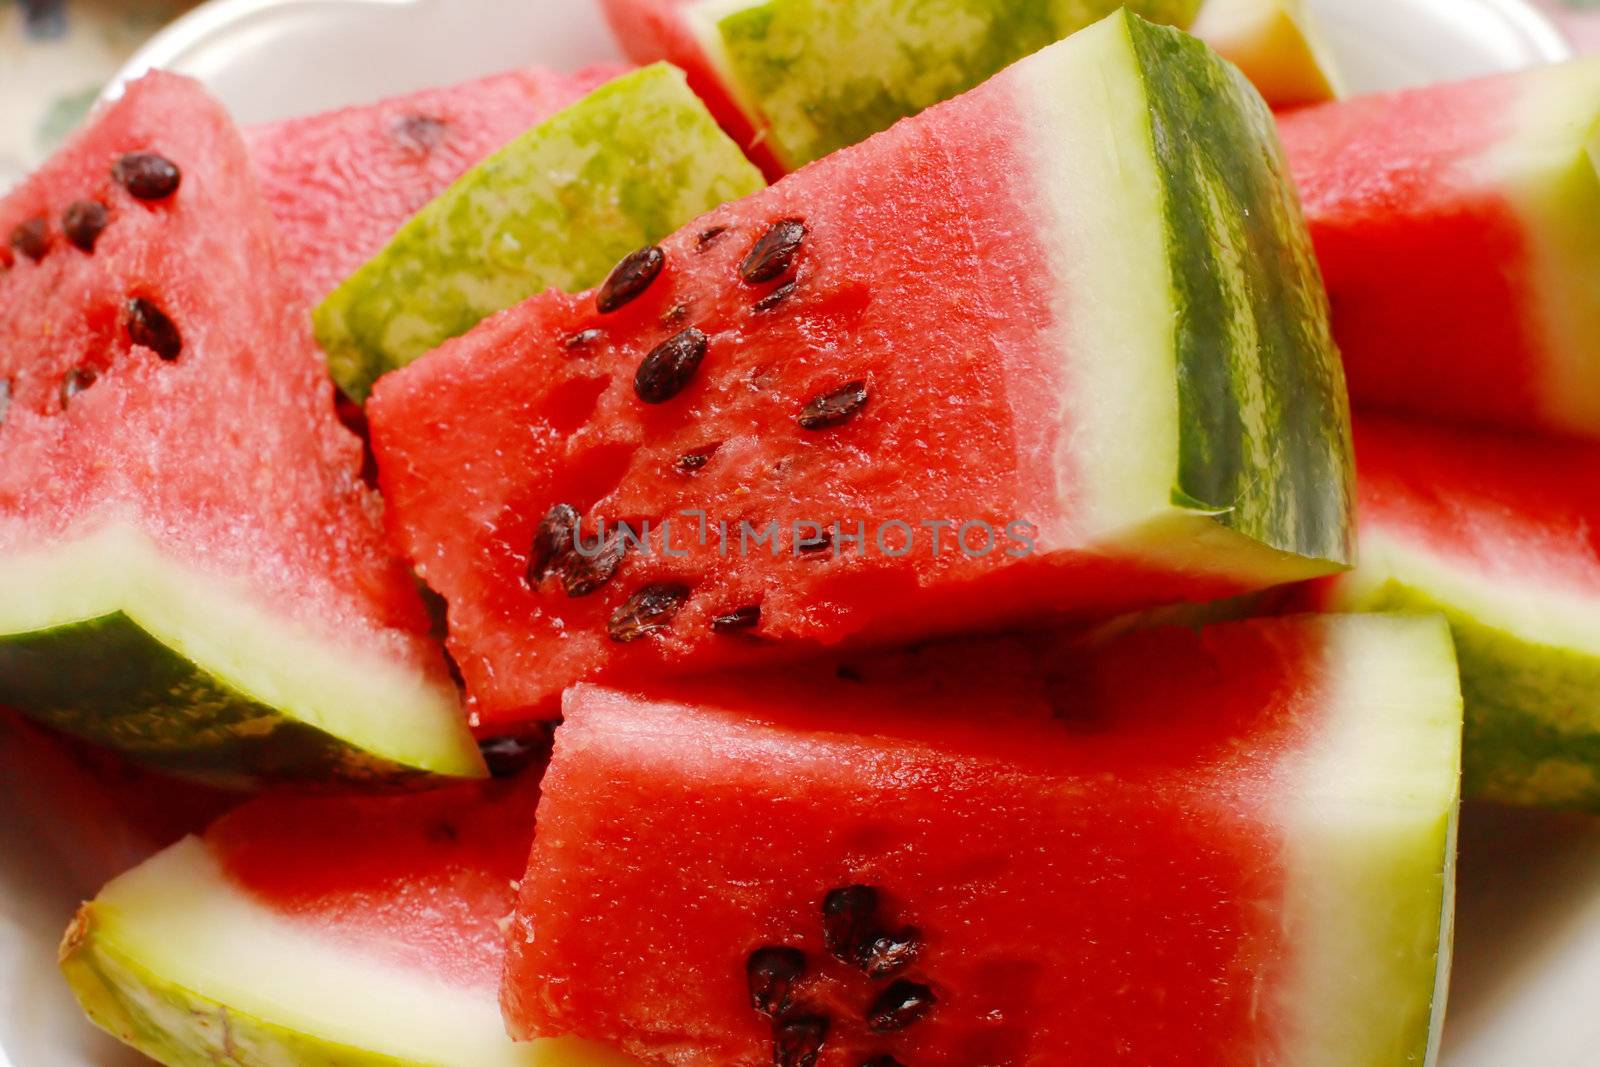 Juicy watermelon. Background of brightly lit watermelon slices.
